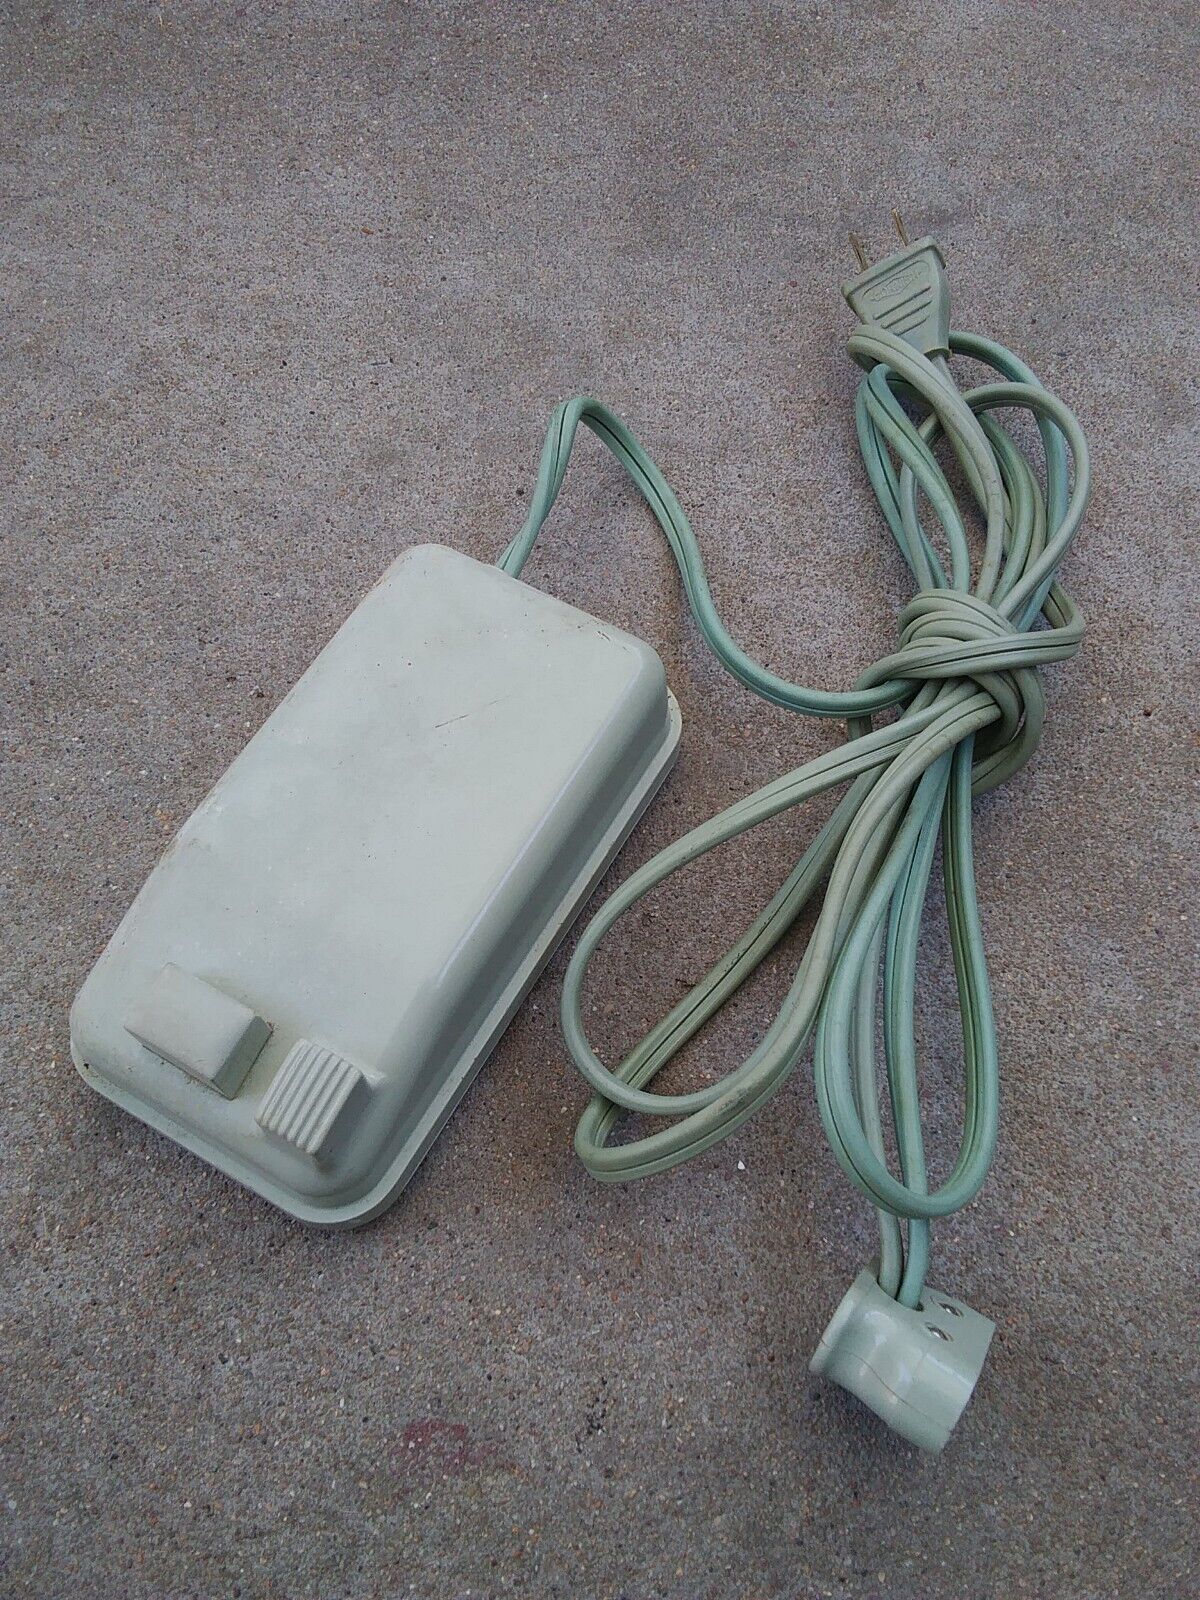 Singer Featherweight 221  Sewing Machine Light Green Bakelite Foot Pedal Only